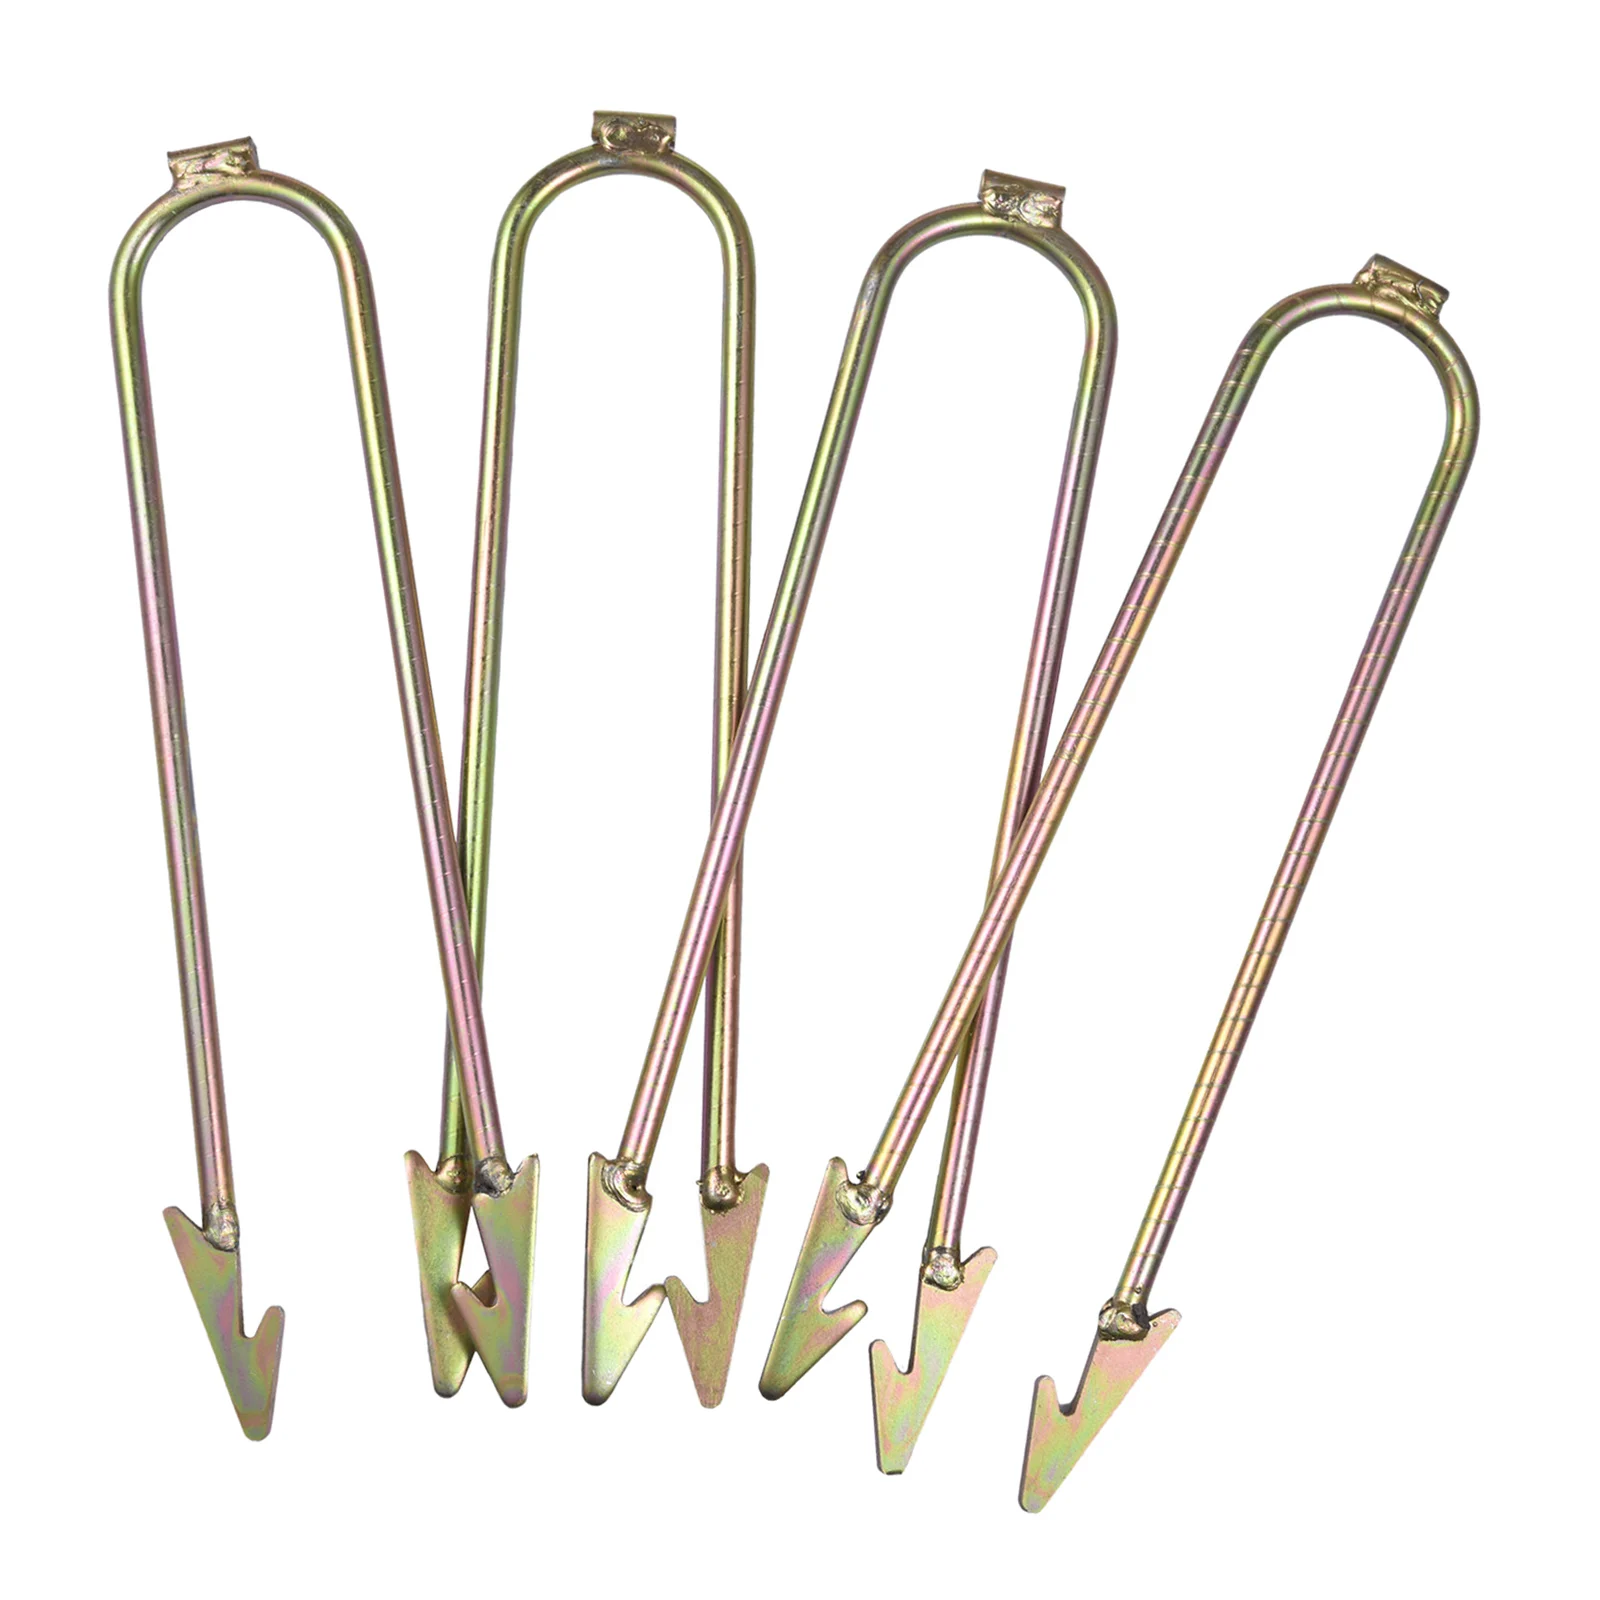 Set of 4 Metal Wind Stakes Ground Anchors fits for Trampolines Fences, Easy To Install